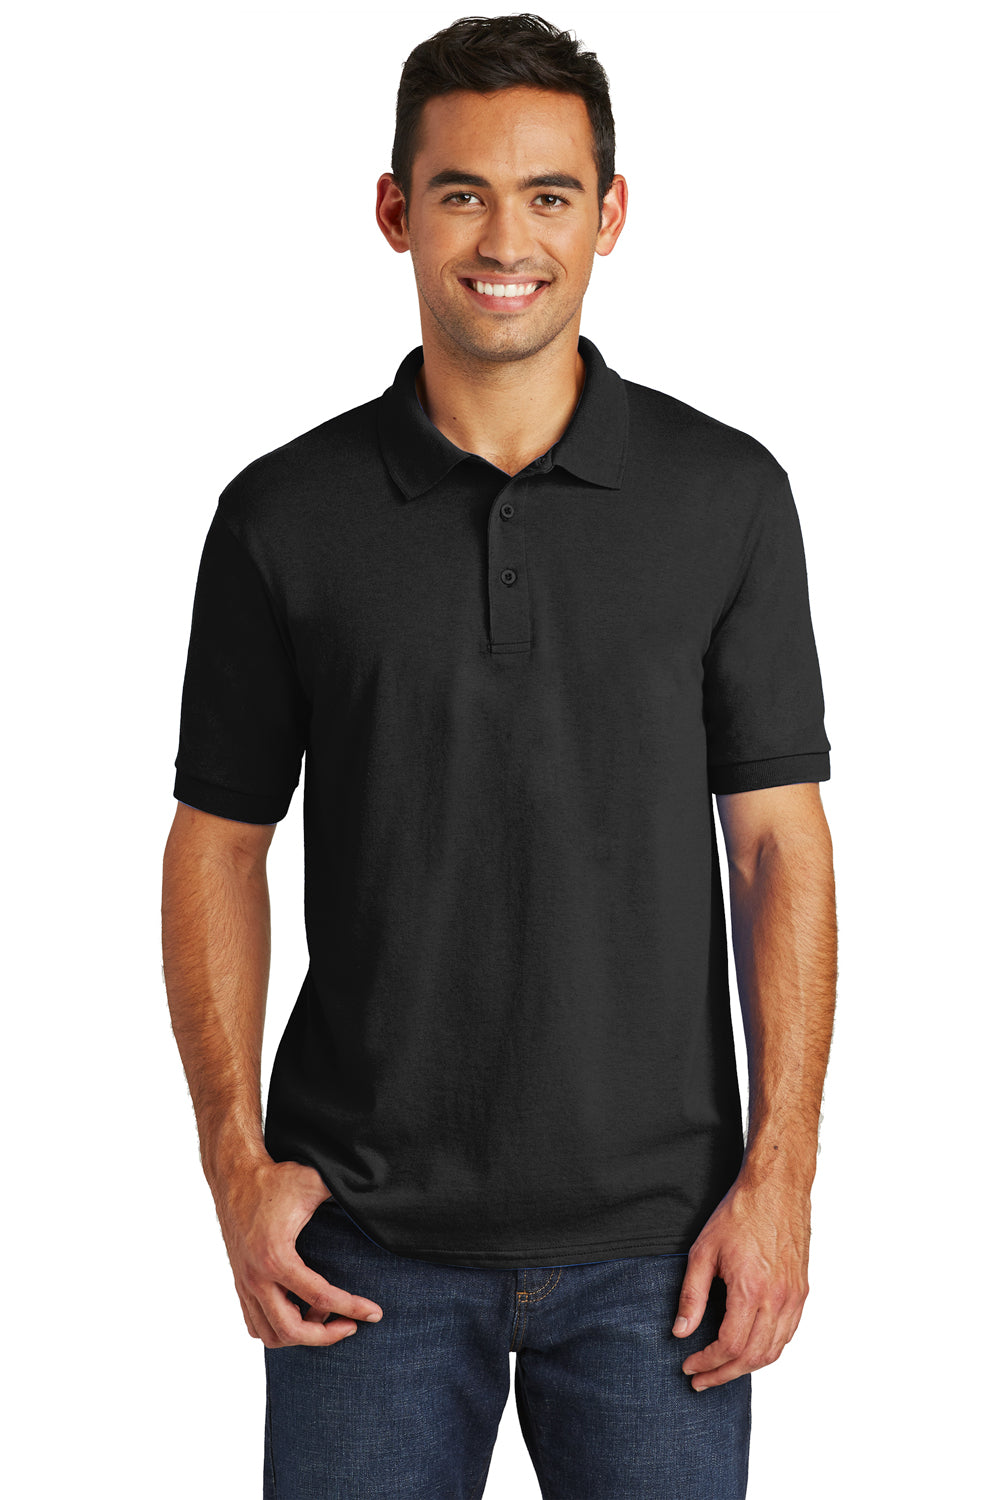 Port & Company KP55 Mens Core Stain Resistant Short Sleeve Polo Shirt Black Front